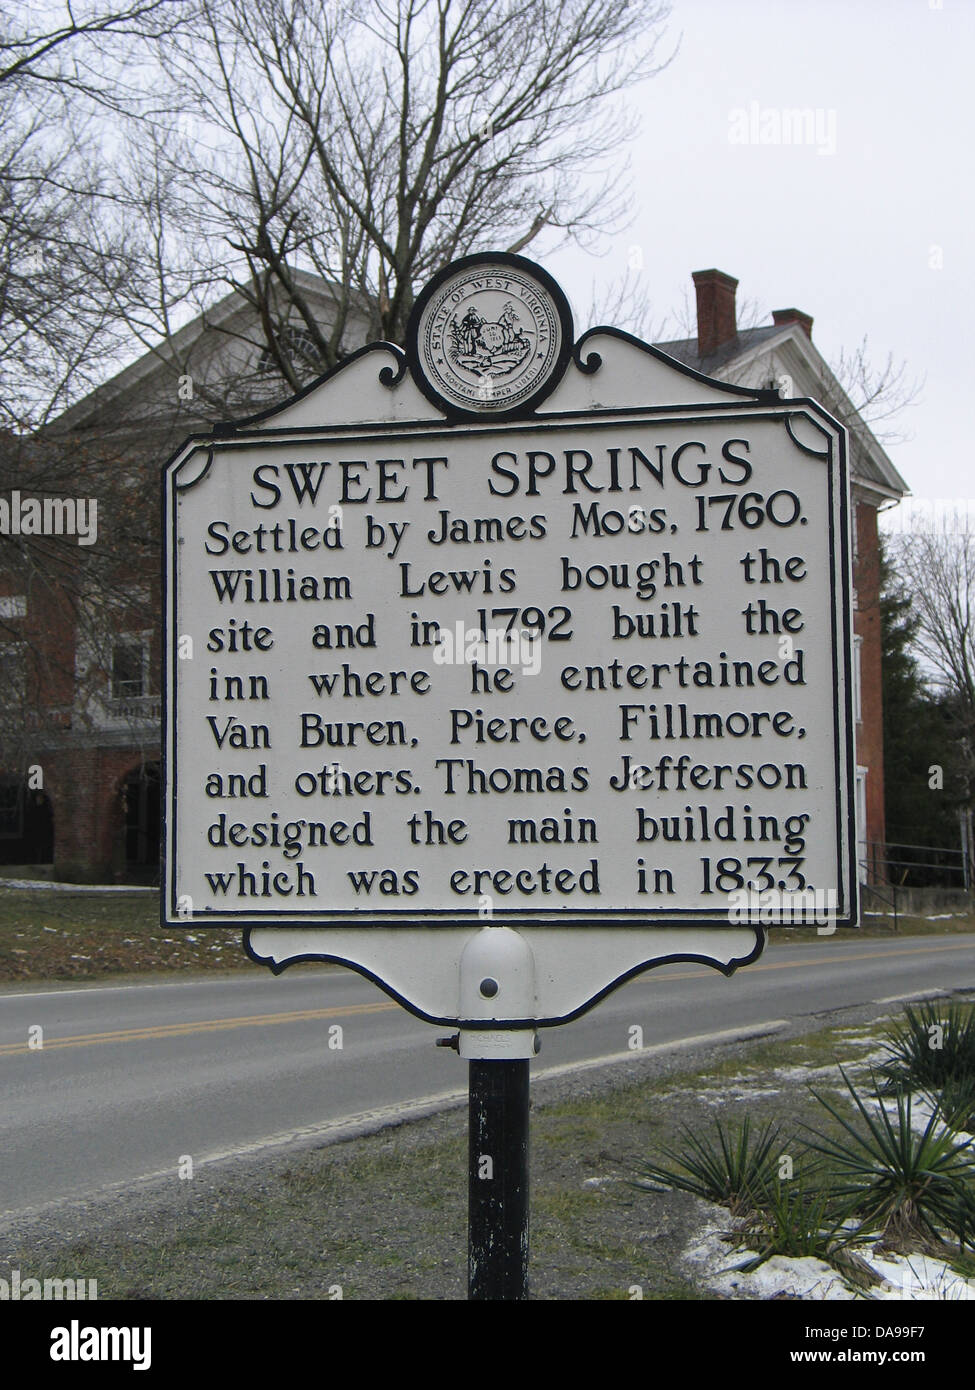 SWEET SPRINGS Settled by James Moss, 1760. William Lewis bought the site and in 1792 built the inn where he entertained Van Buren, Pierce, Fillmore, and others. Thomas Jefferson designed the main building which was erected in 1833. Stock Photo